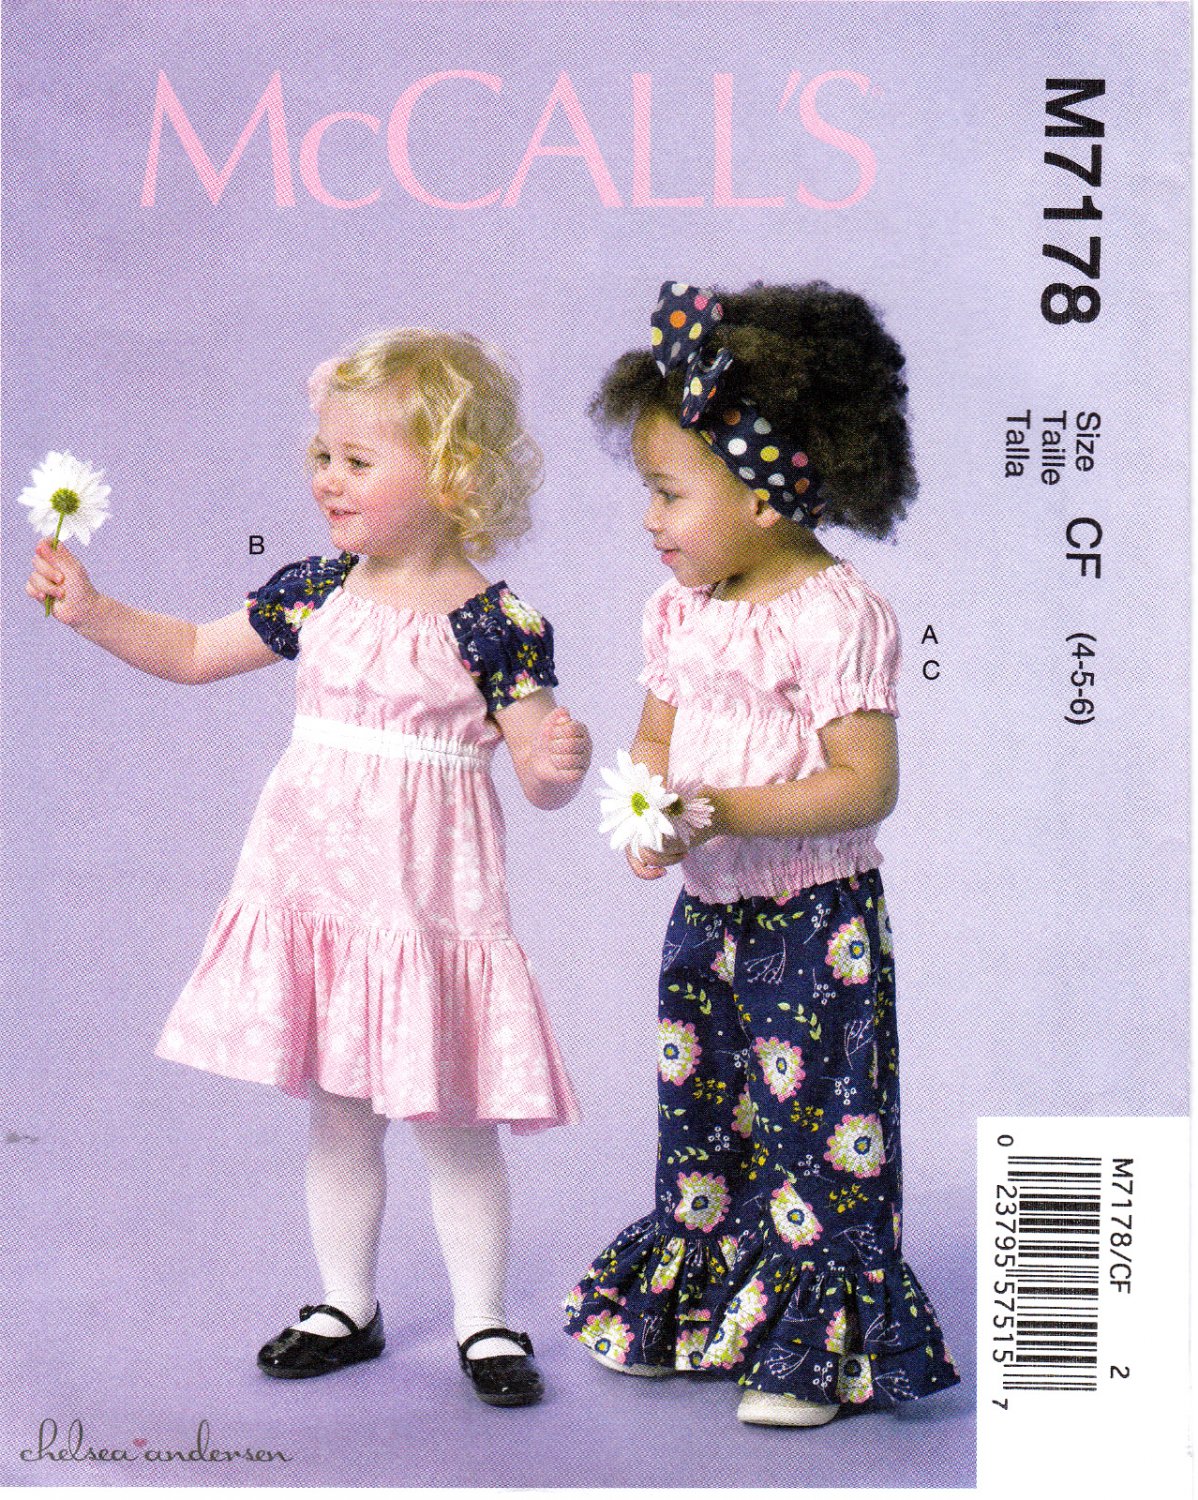 McCall's M7178 7178 Toddler Girls Sewing Pattern Pullover Top Dress Pants Ruffles Child Sizes 4-5-6